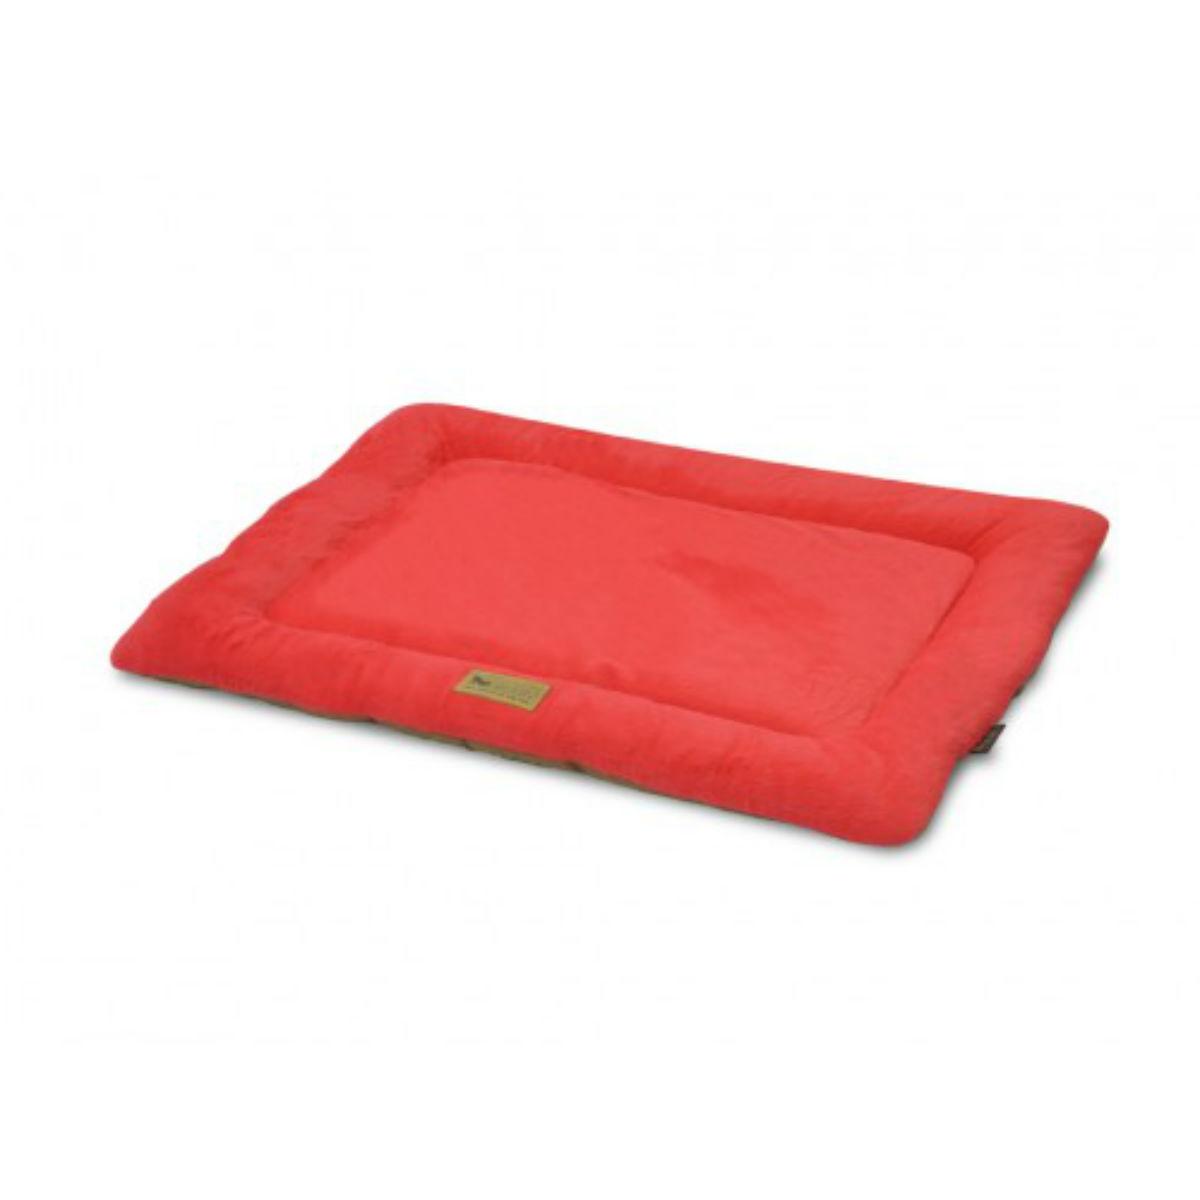 P.L.A.Y. Chill Pad Pet Bed - Red/Hazelnut